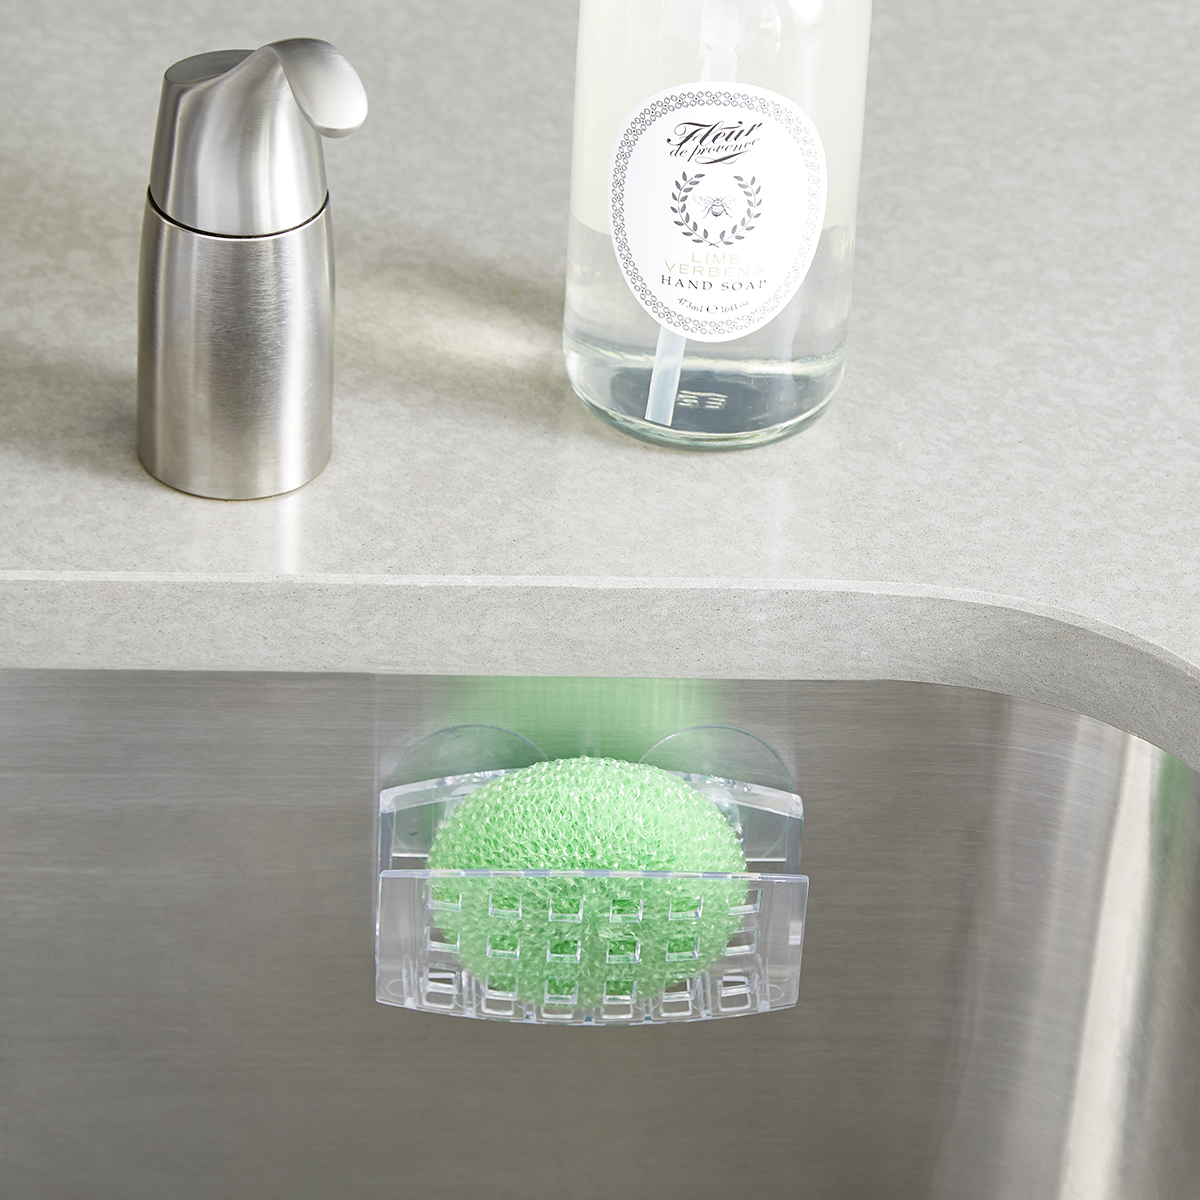 iDesign Suction Sponge Holder | The Container Store